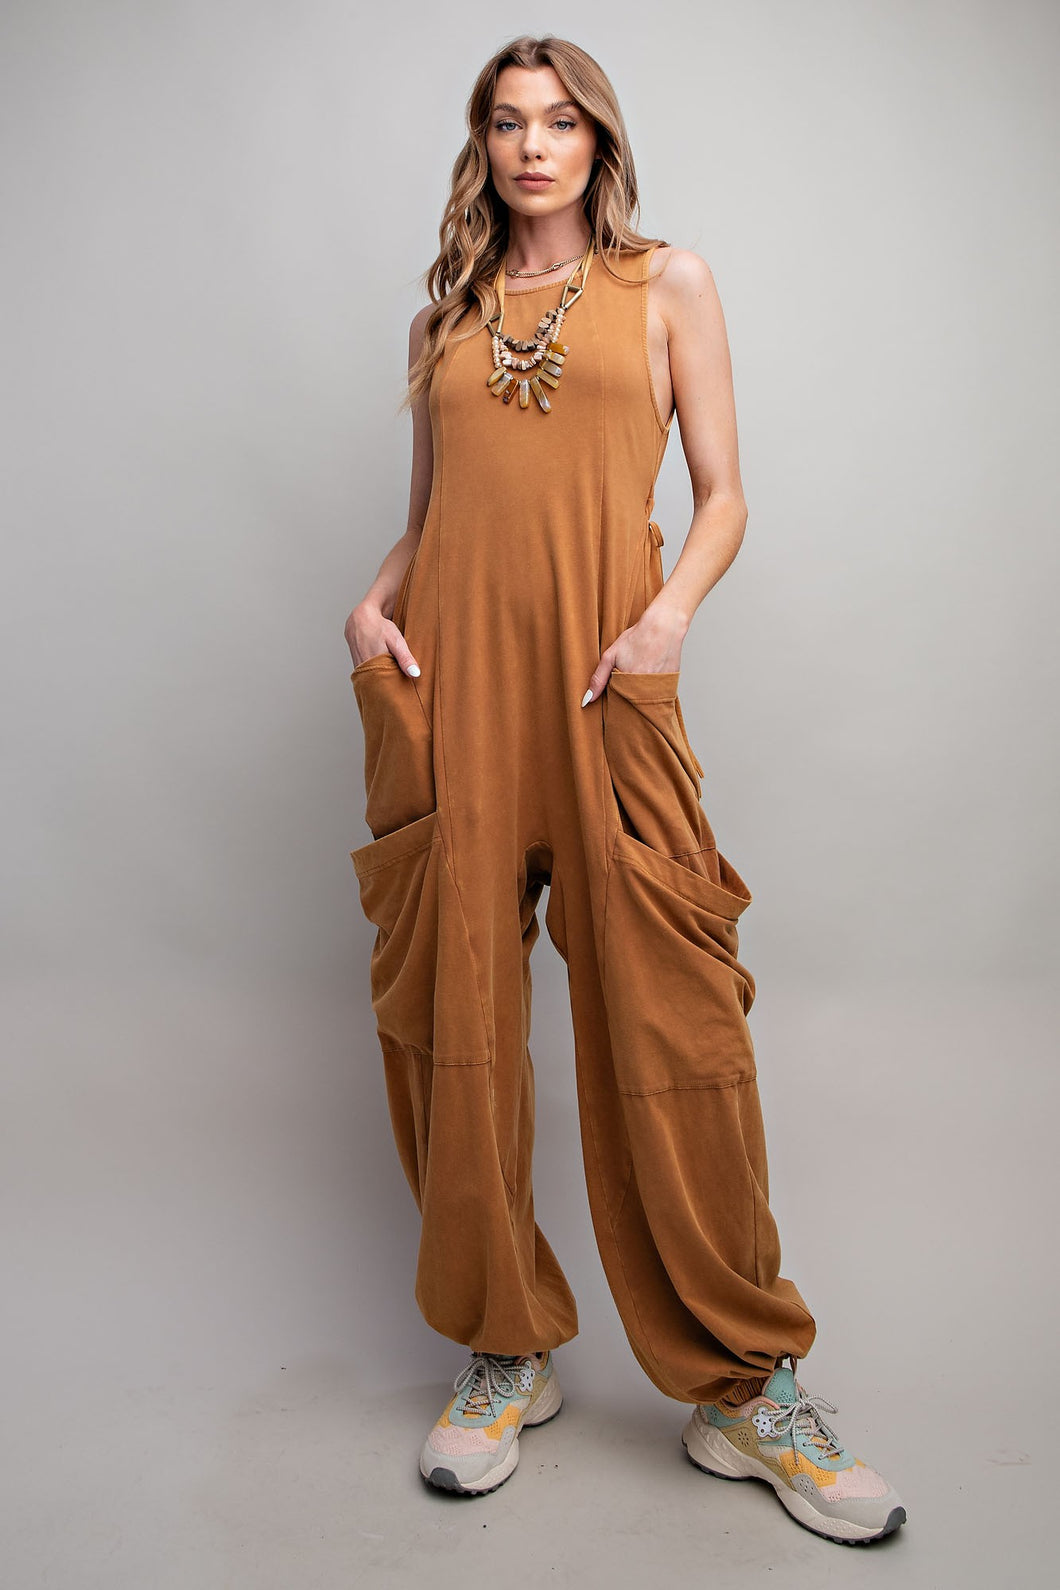 Easel Mineral Washed Cargo Jumpsuit in Camel Pants Easel   